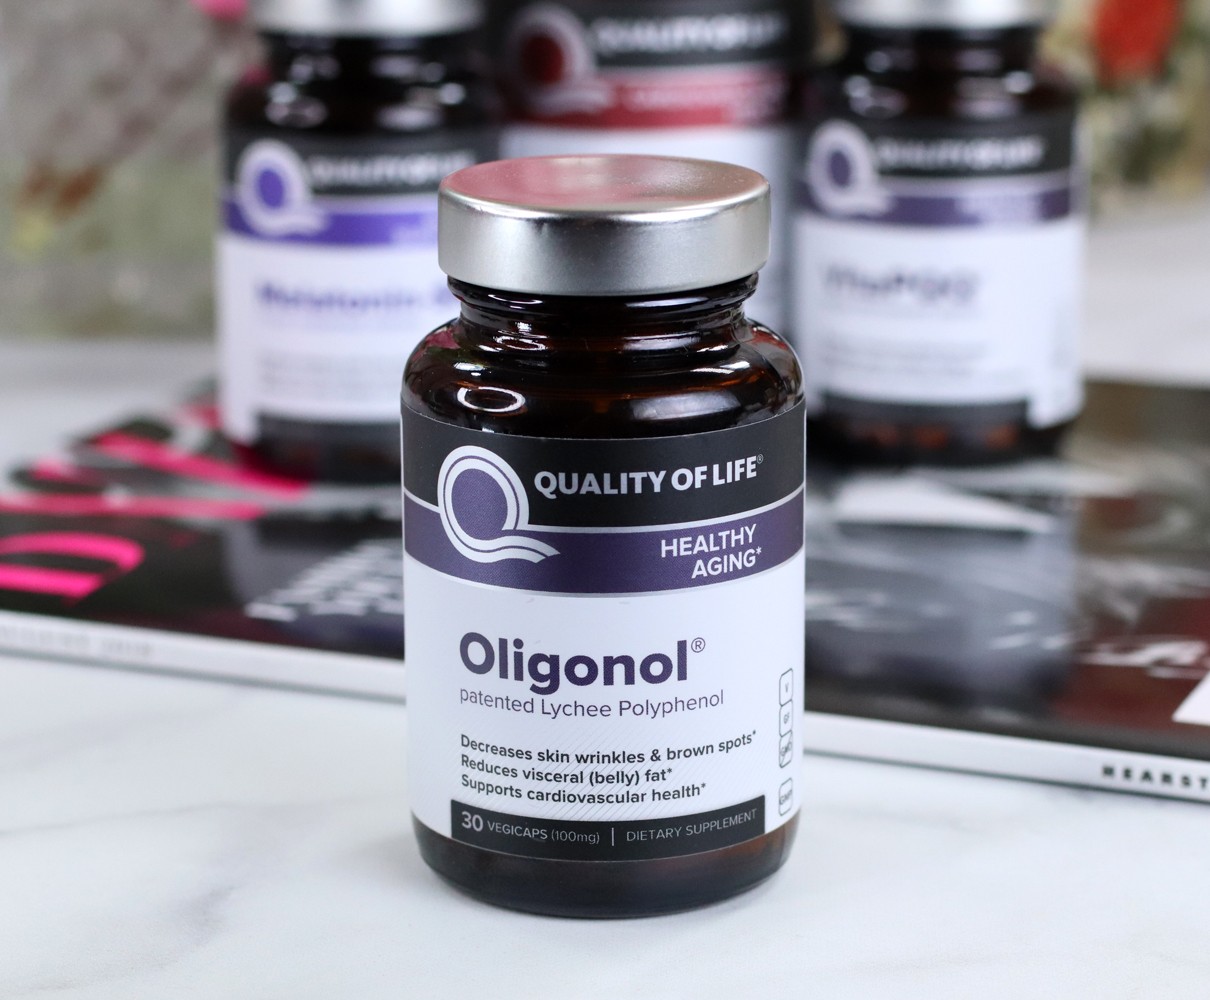 Oligonol Lychee Polyphenol Extract - Health Focus: My Favorite Anti-Aging Products from QOL Supplements featured by popular Los Angeles beauty blogger My Beauty Bunny